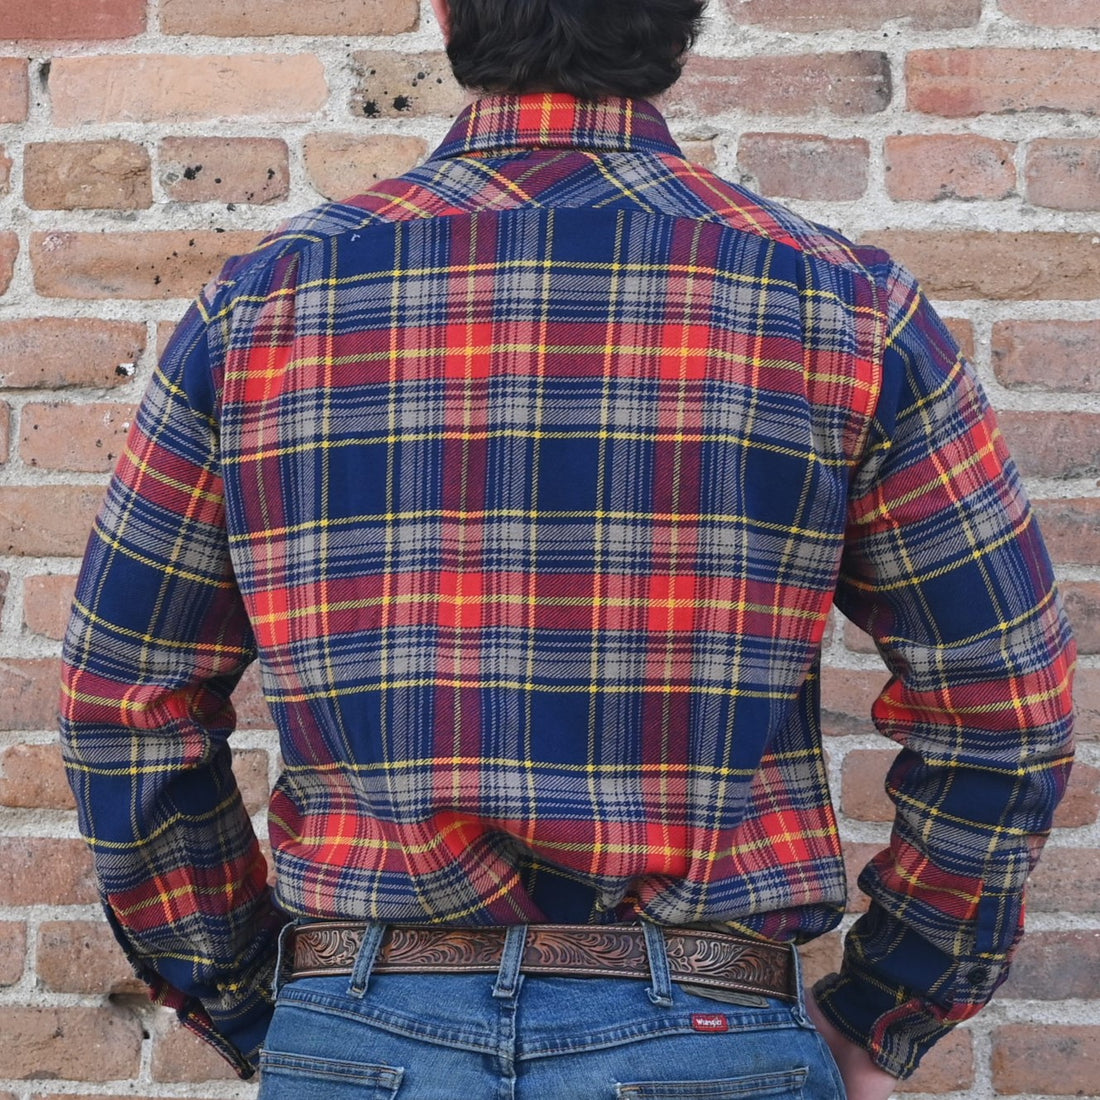 Filson Vintage Flannel Work Shirt view of back in red plaid color